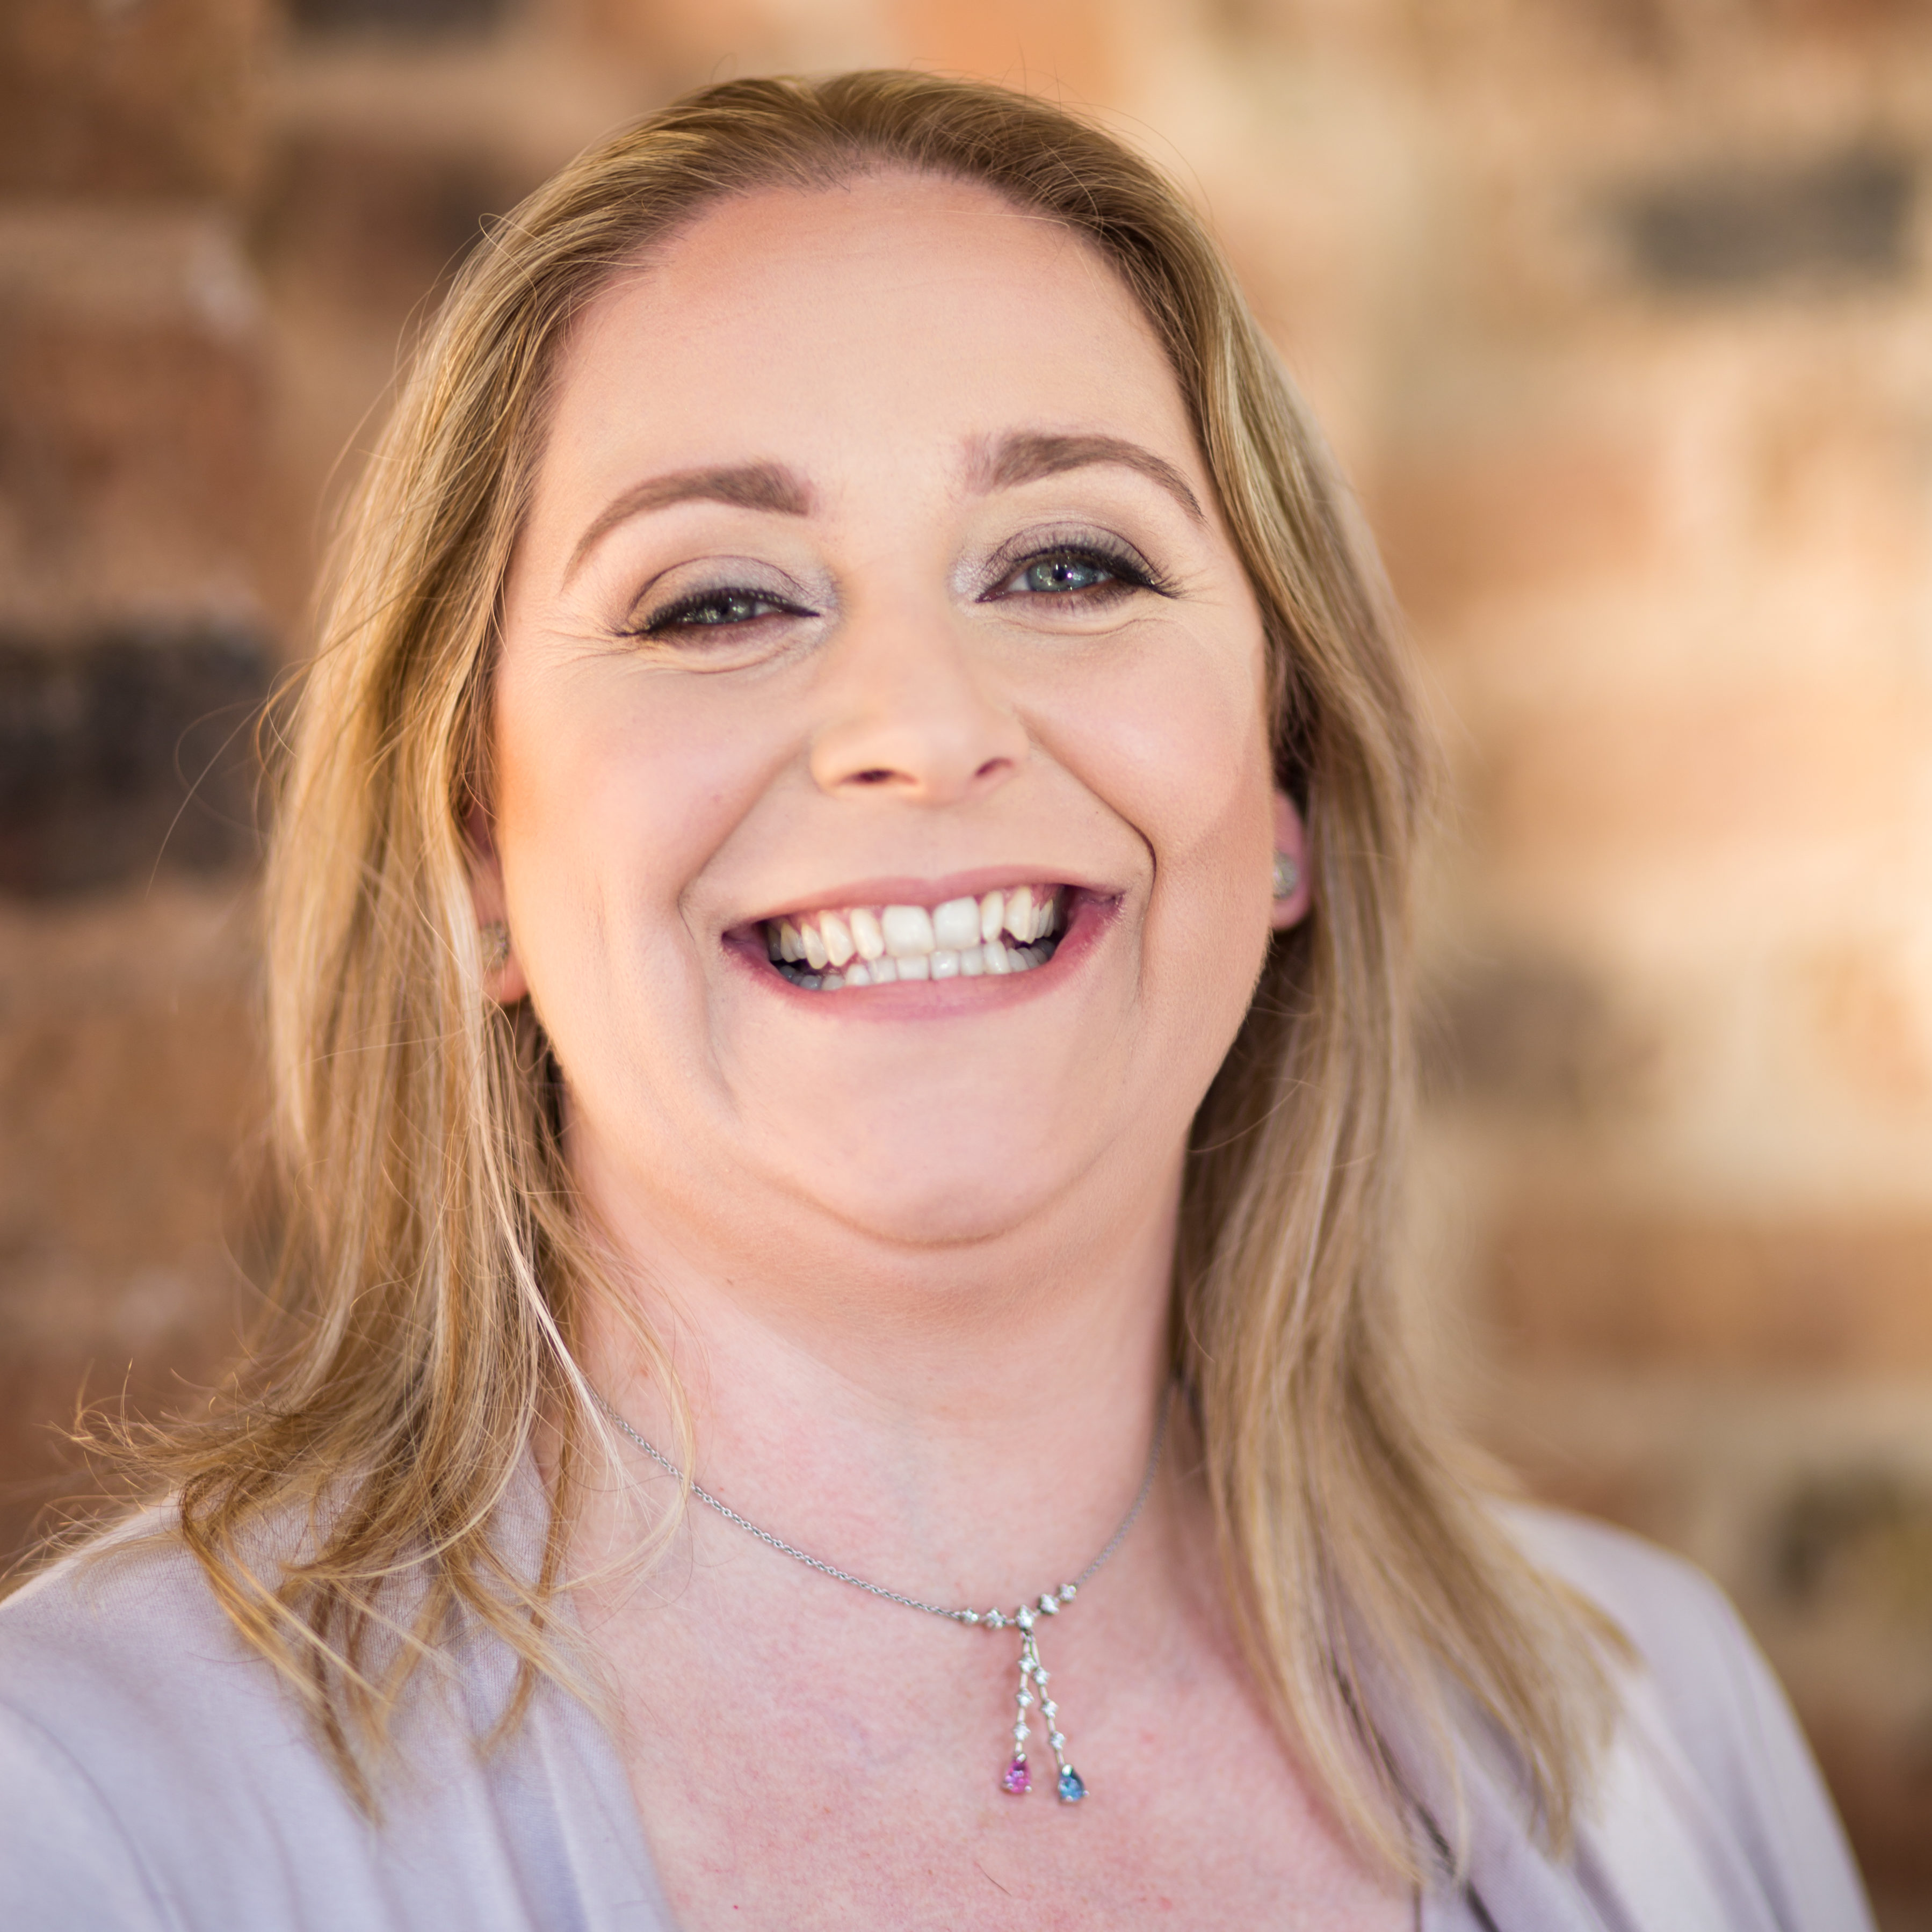 Melanie Fitzpatrick Trainer Profile Picture for Training Matchmaker Northern Ireland Trainer Profile Listing